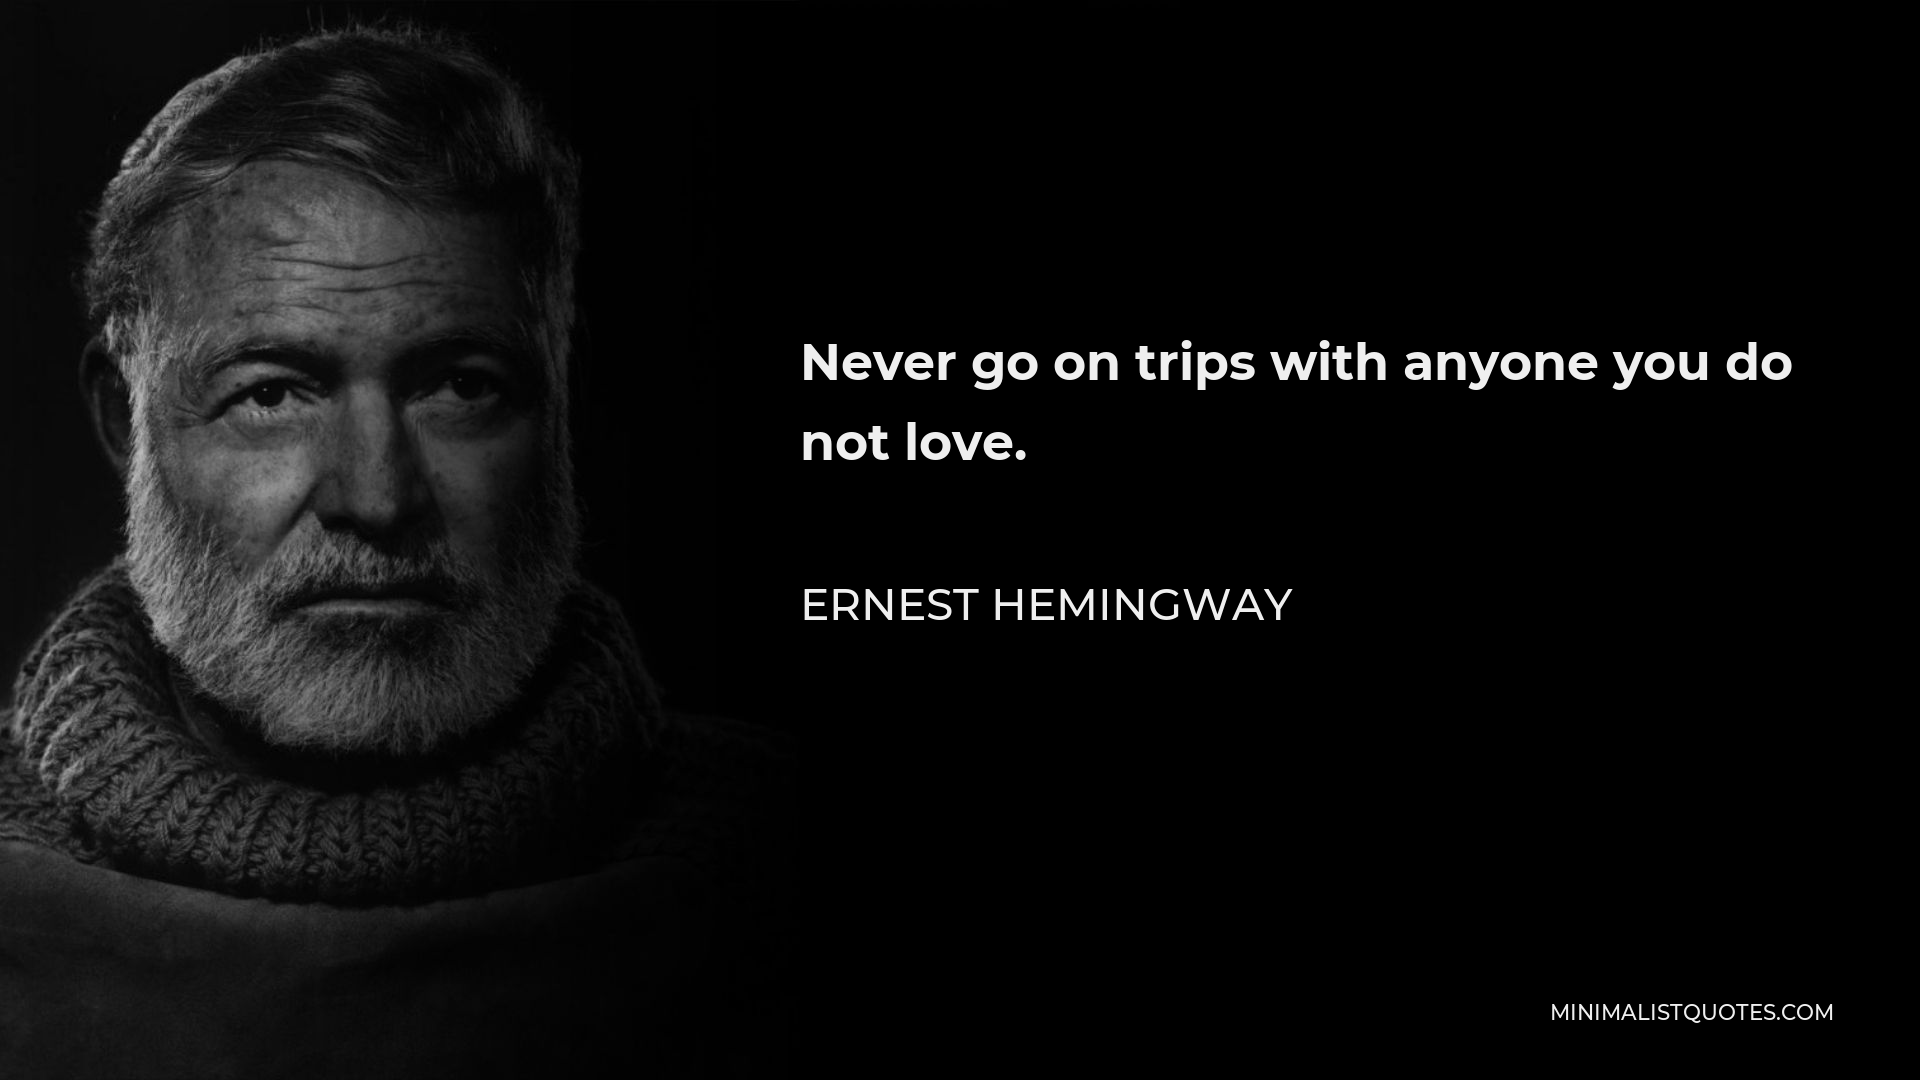 Ernest Hemingway Quote: Never go on trips with anyone you do not love.